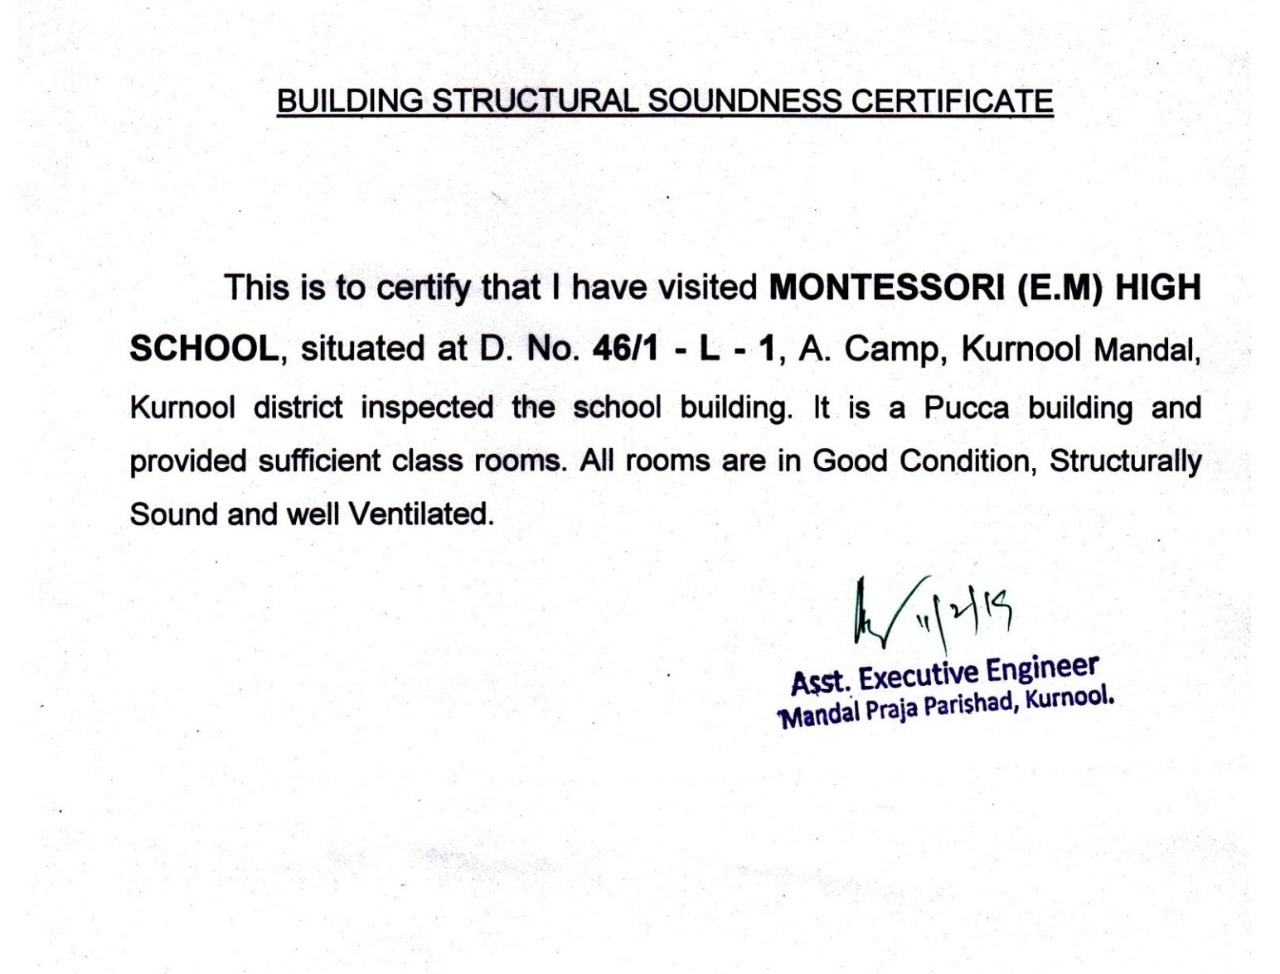 BUILDING-STRUCTURAL-CERTIFICATE